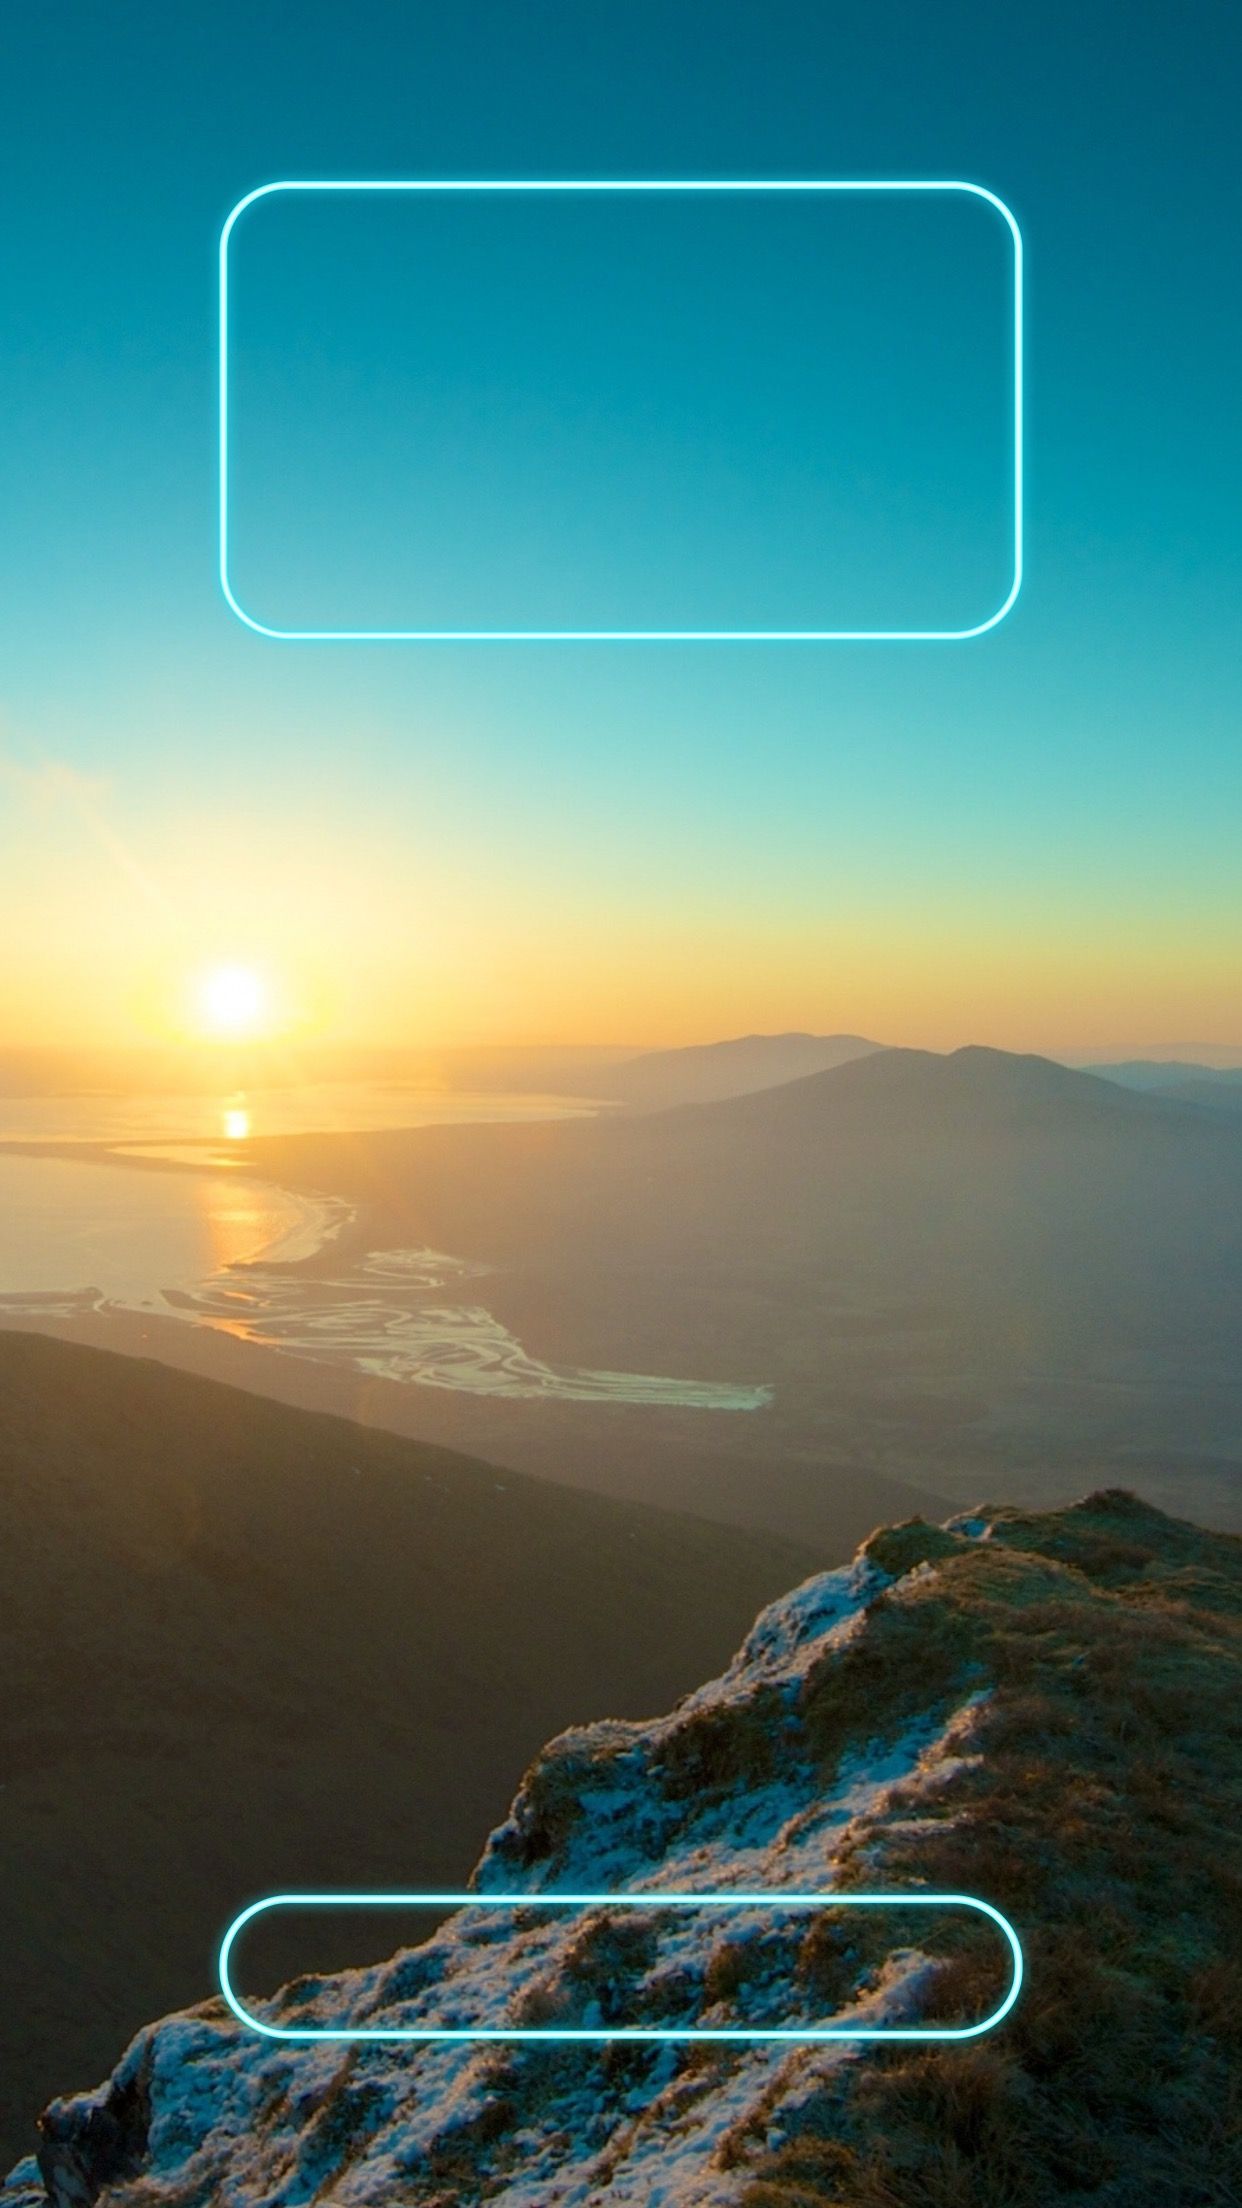 Heres 10 Lockscreens with Nature Views for the iPhone 6 Plus